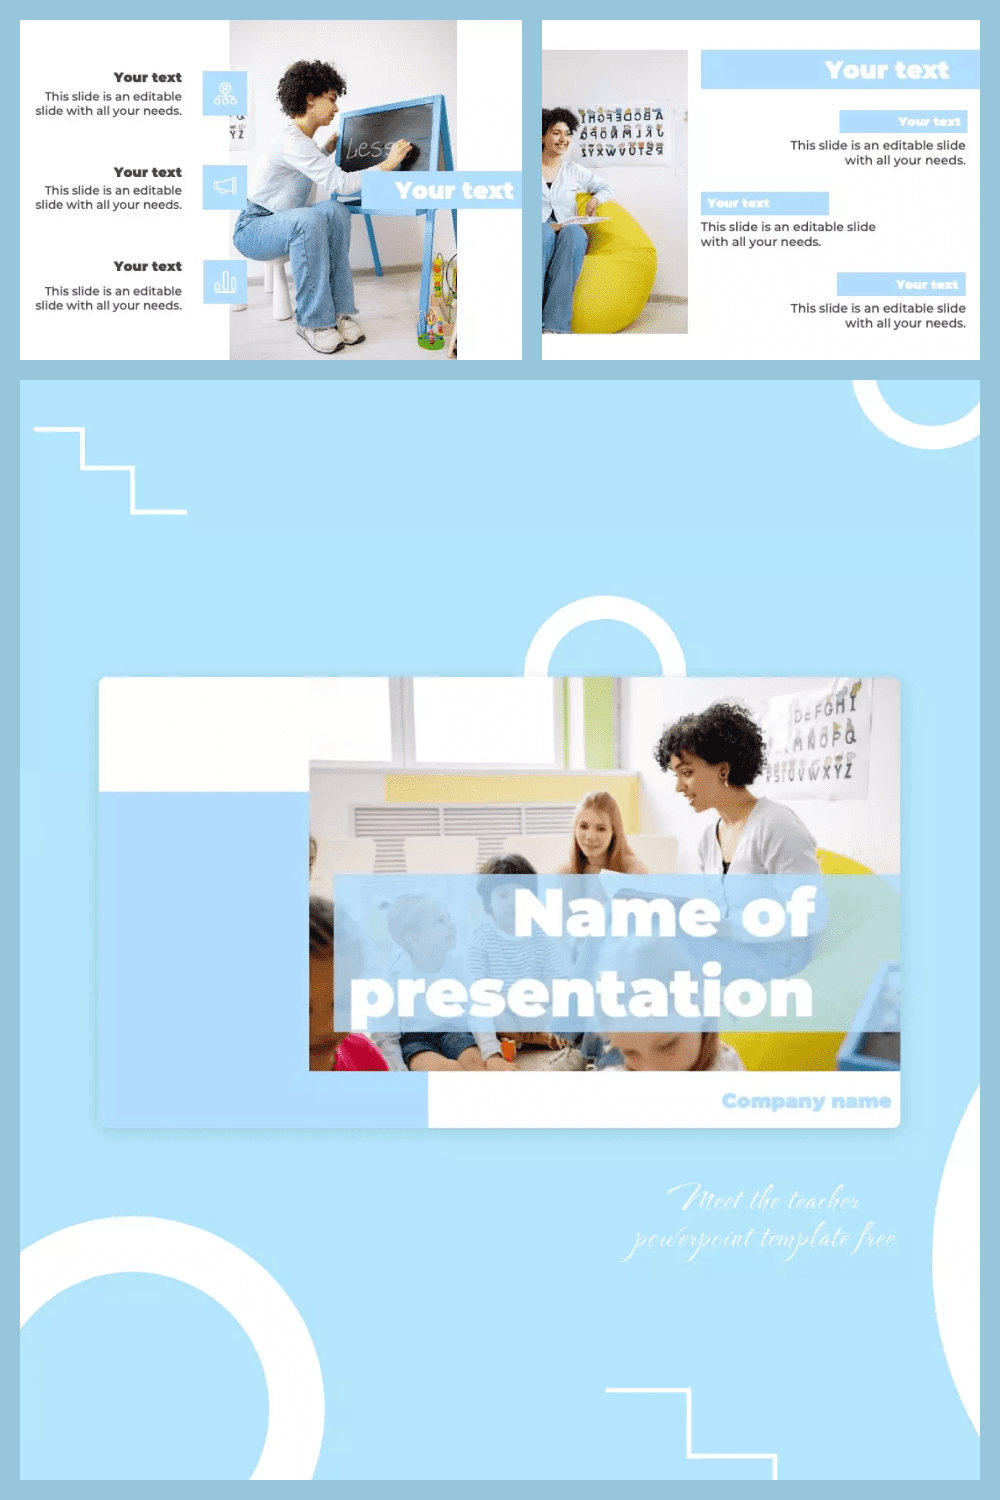 Screenshots of template pages with blue background and photos of the teacher.